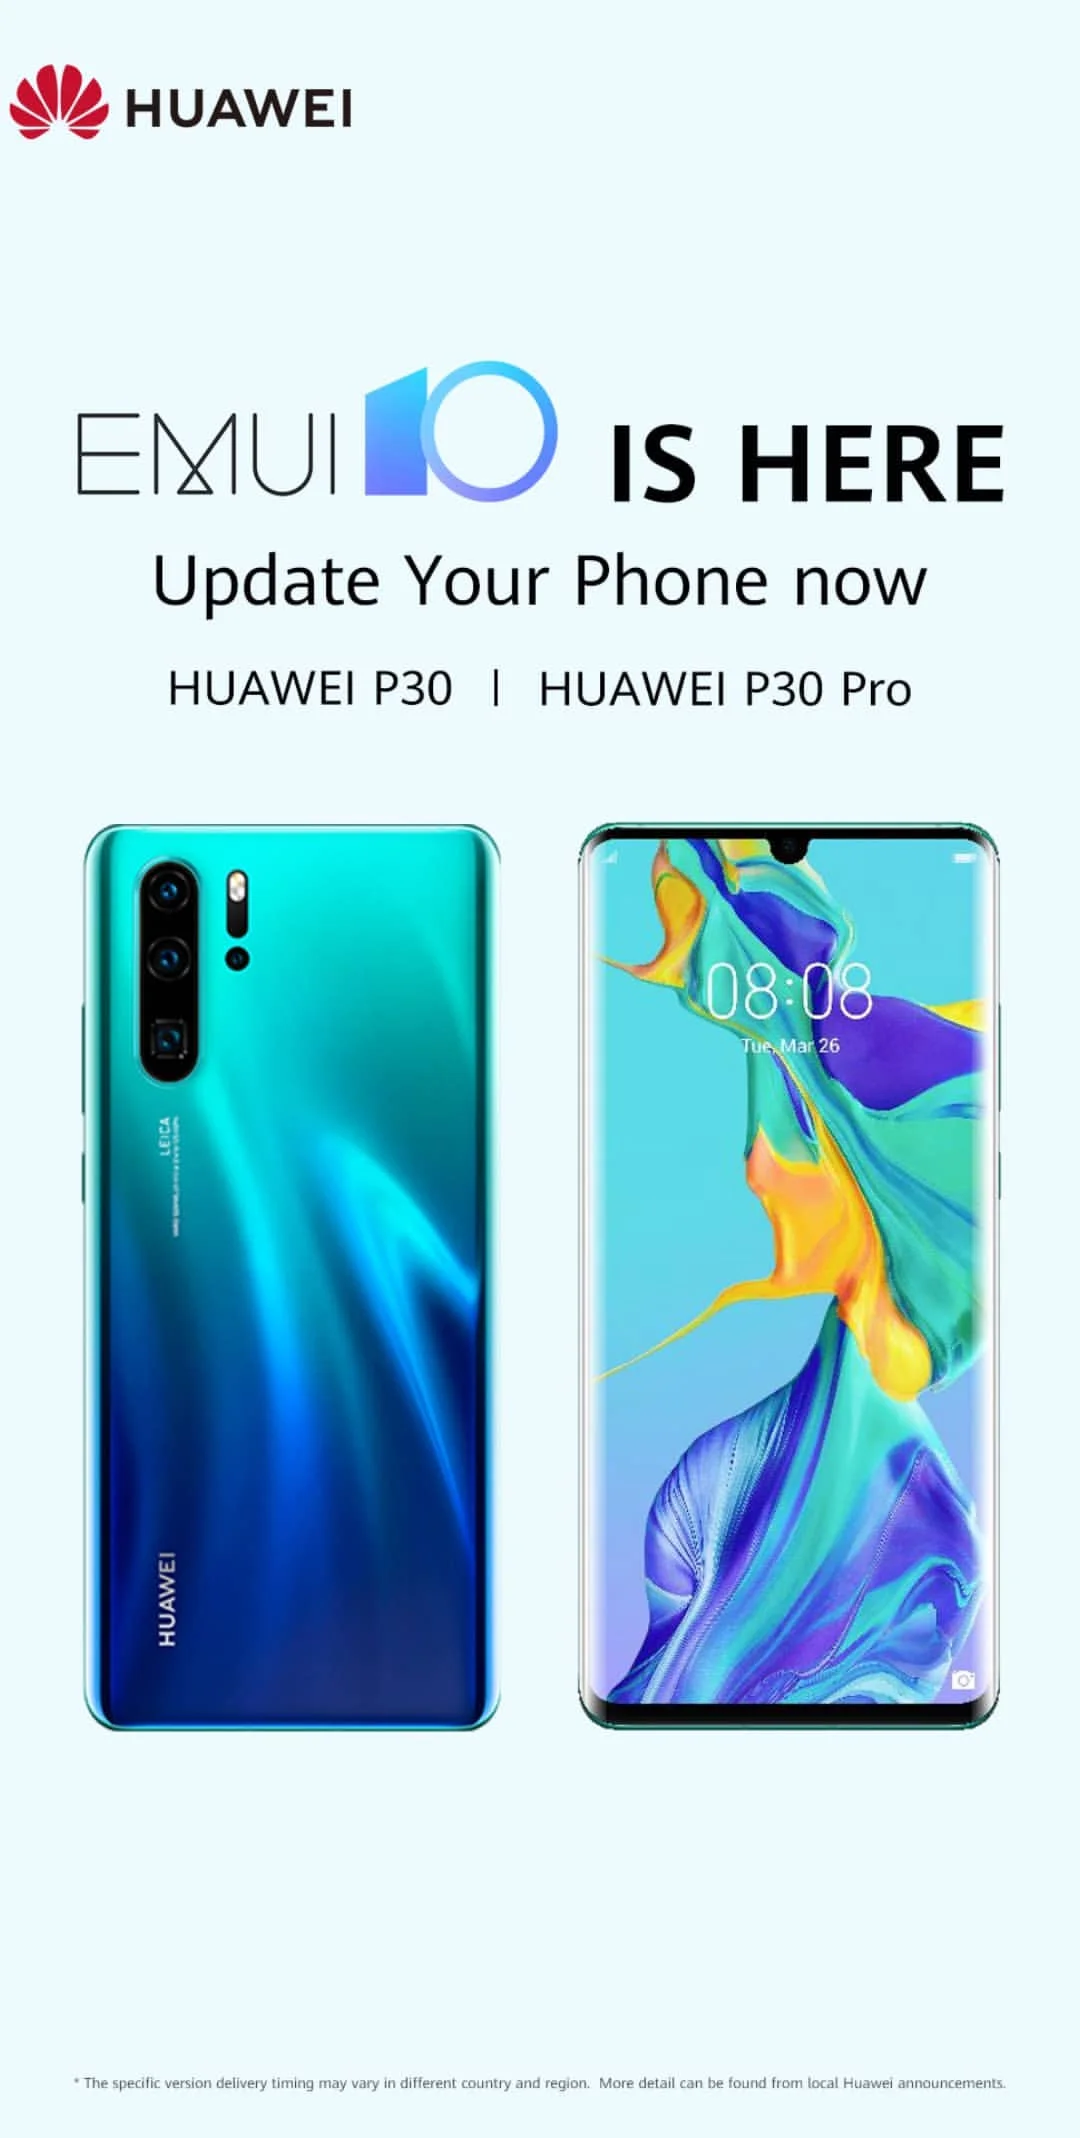 Huawei P30 and P30 Pro have received EMUI 10 update.